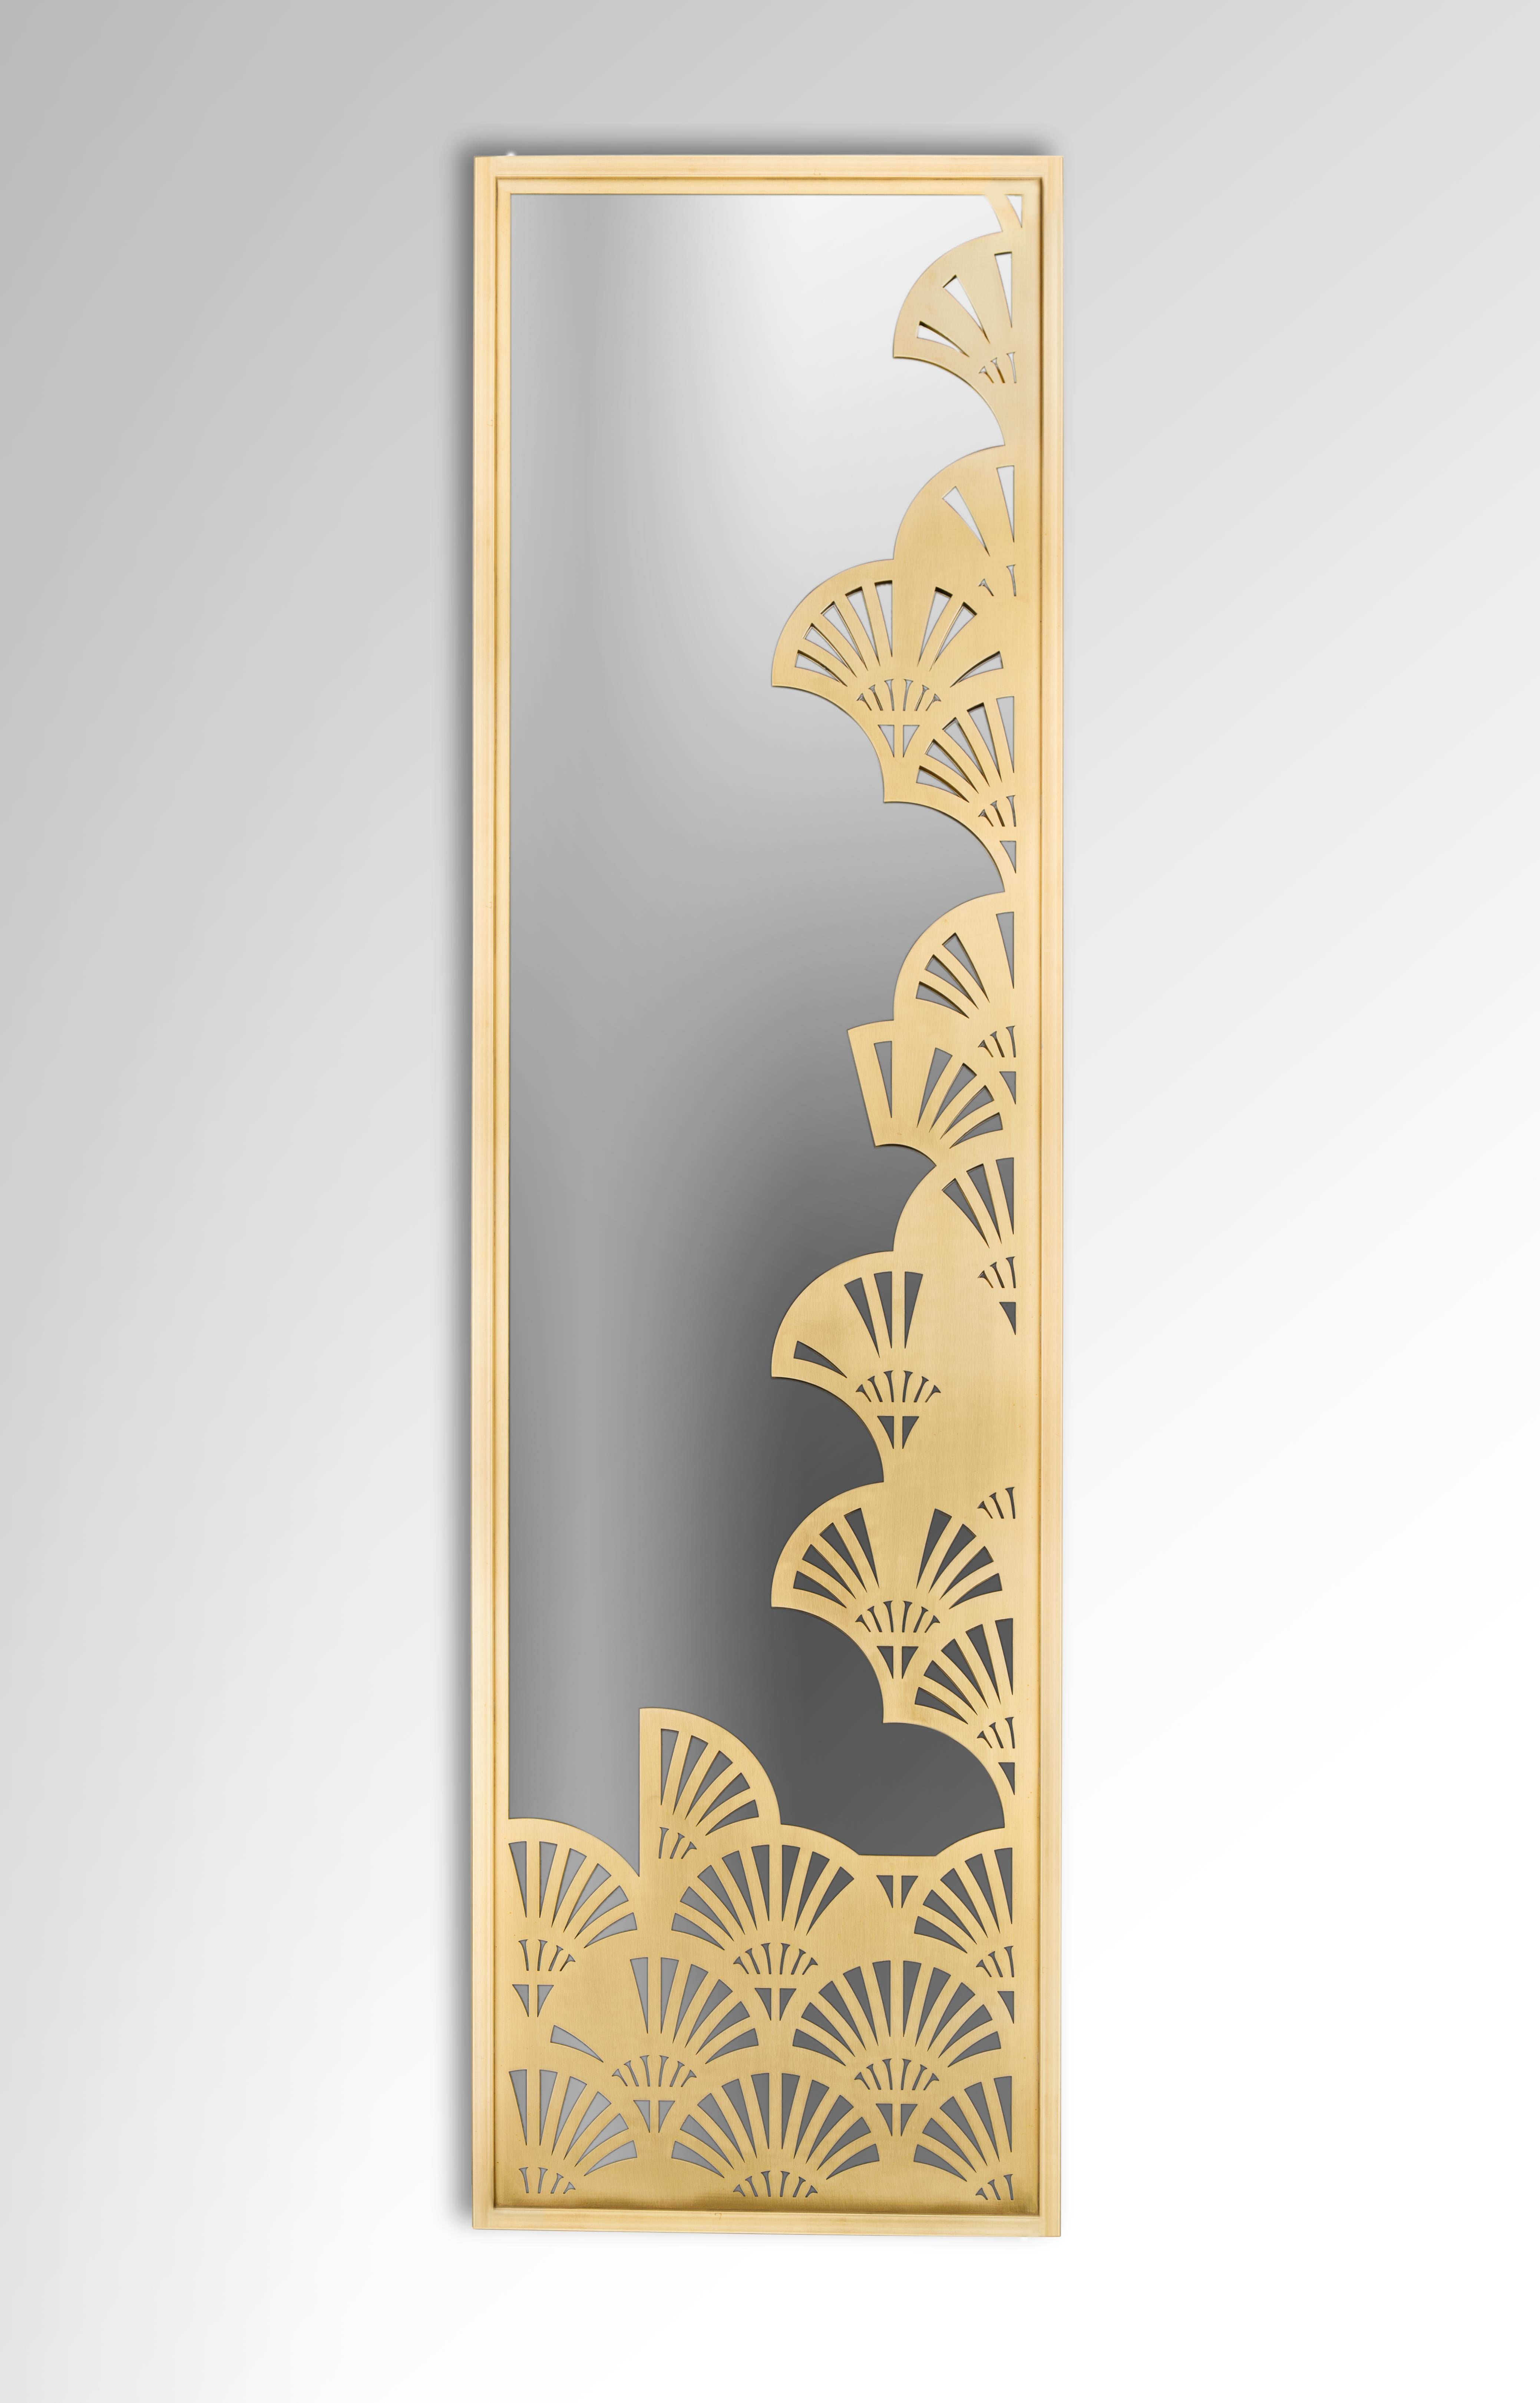 Asymmetric Lotus Pattern Brass Mirror Inspired from Ancient Egypt.
Add a sense of space to a room or hallway with our statement For The Love of Lotus brass accent mirror. The brass finish adds sophistication to your place and its innovative